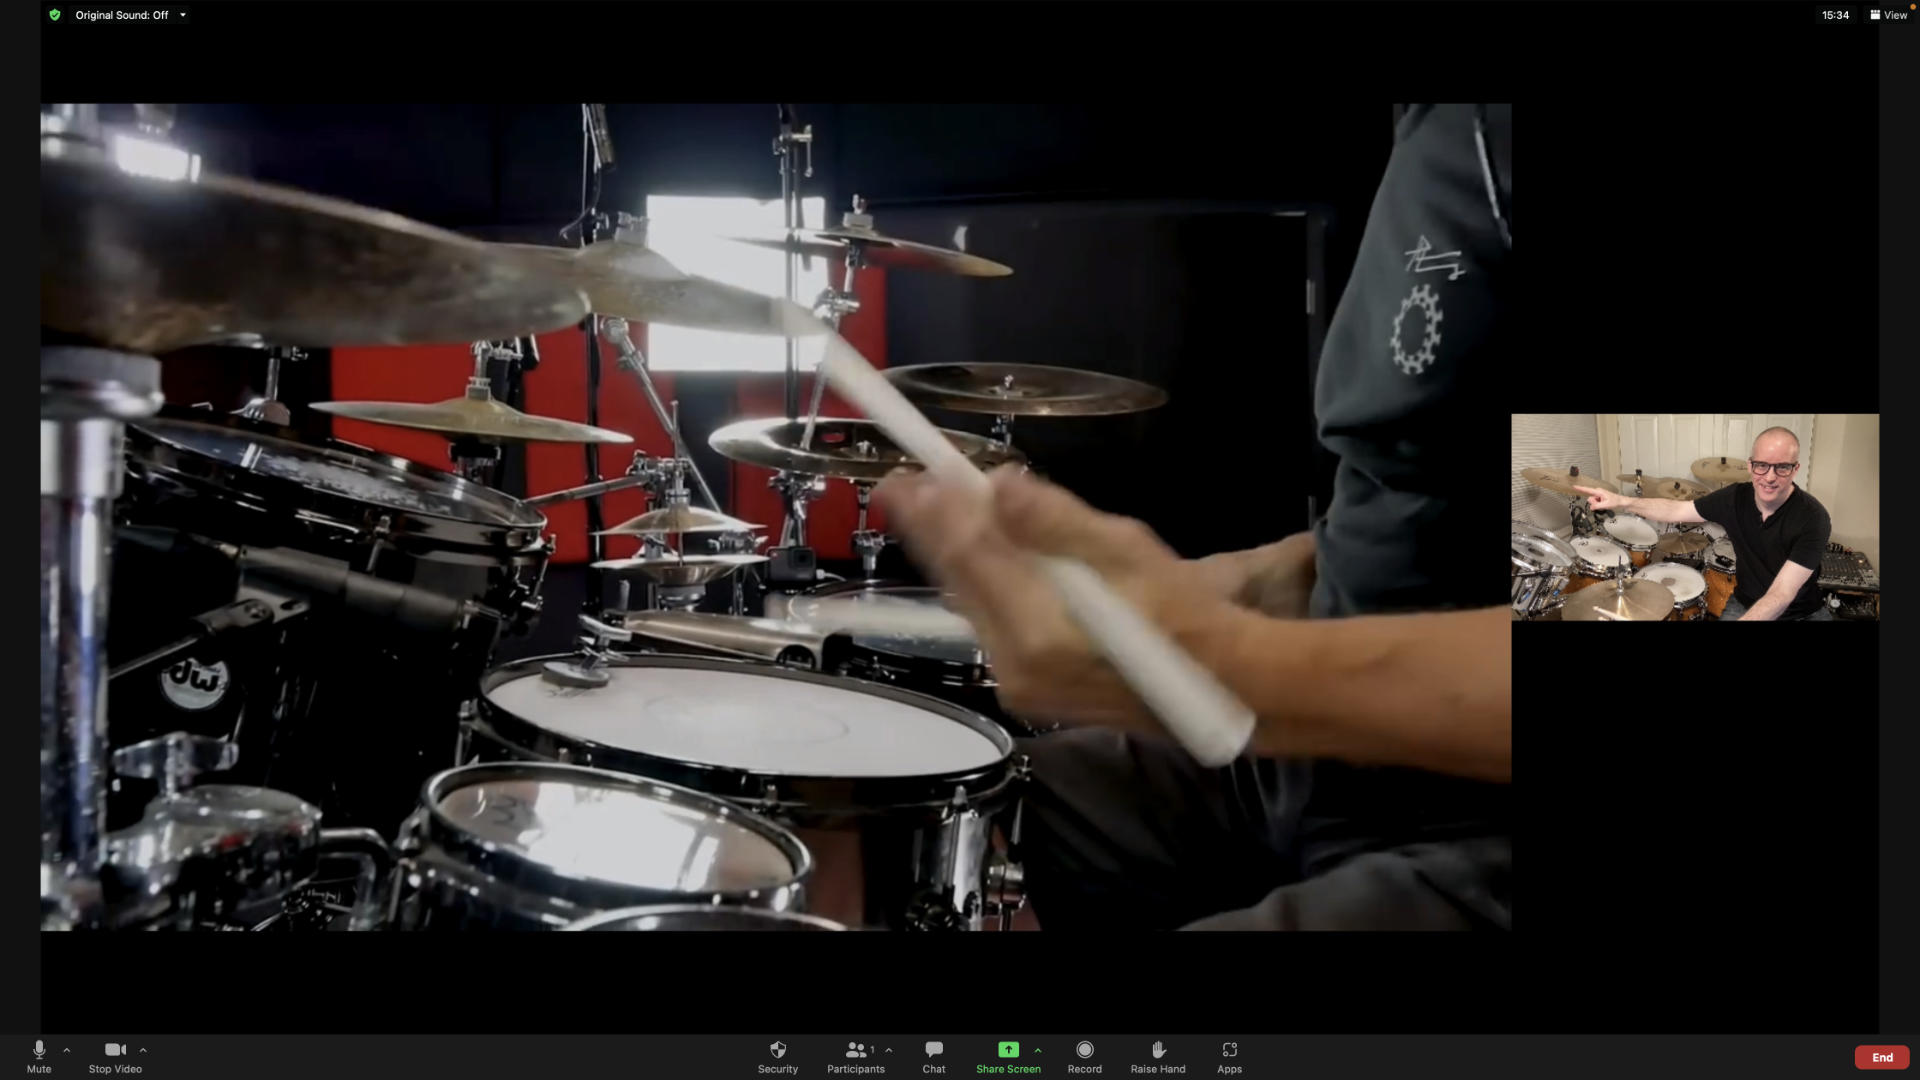 Watch Justin play along with drumming videos.